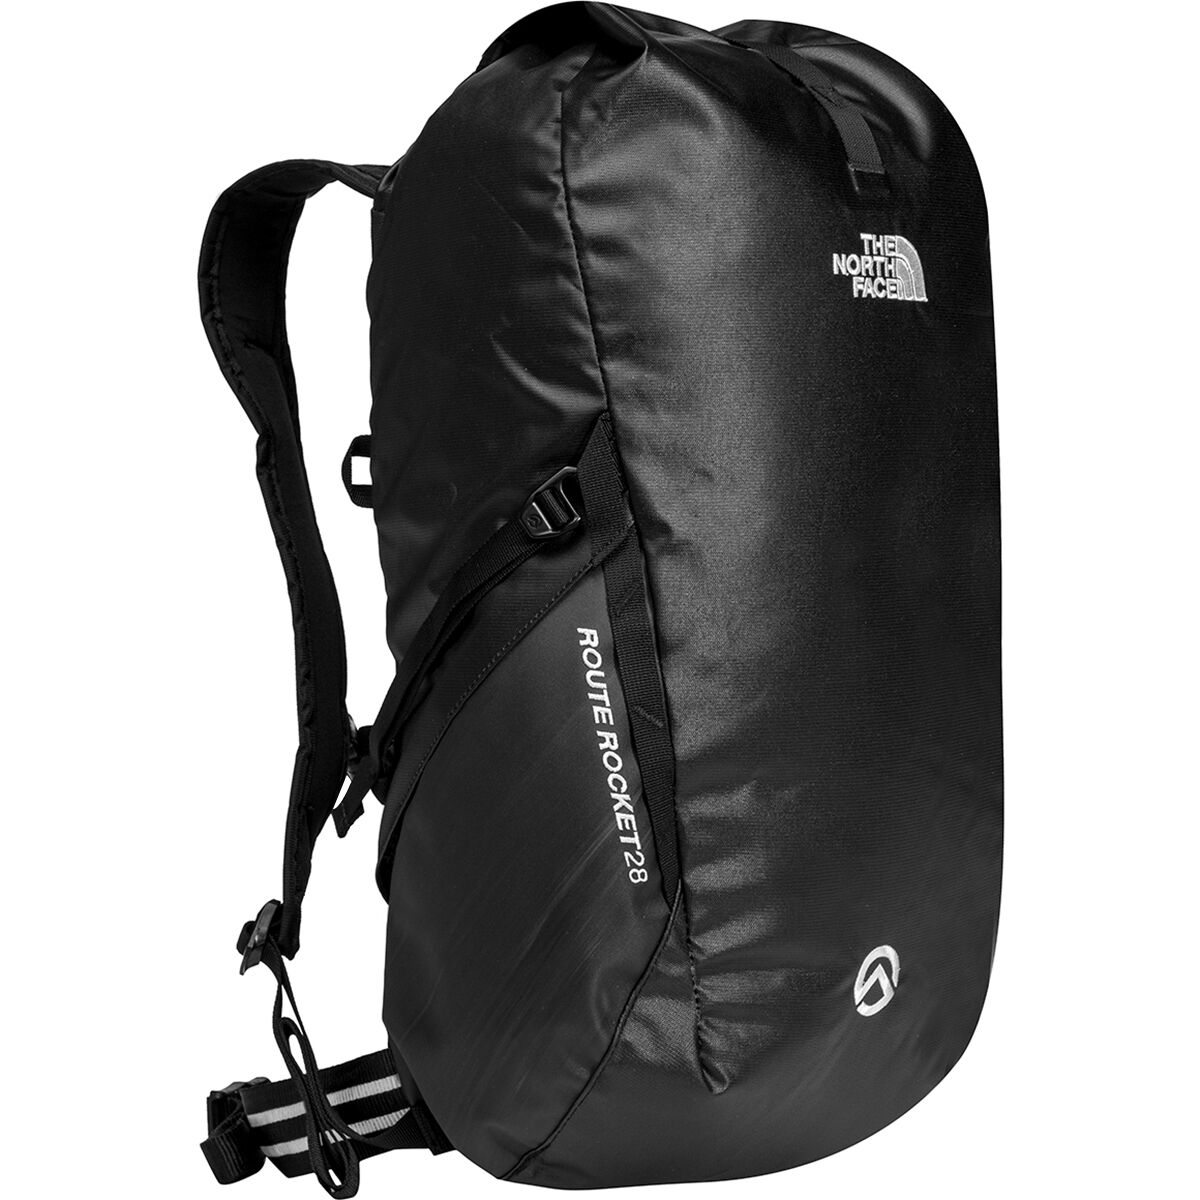 Verwachten Periodiek mengsel The North Face Route Rocket 28L Daypack - Accessories